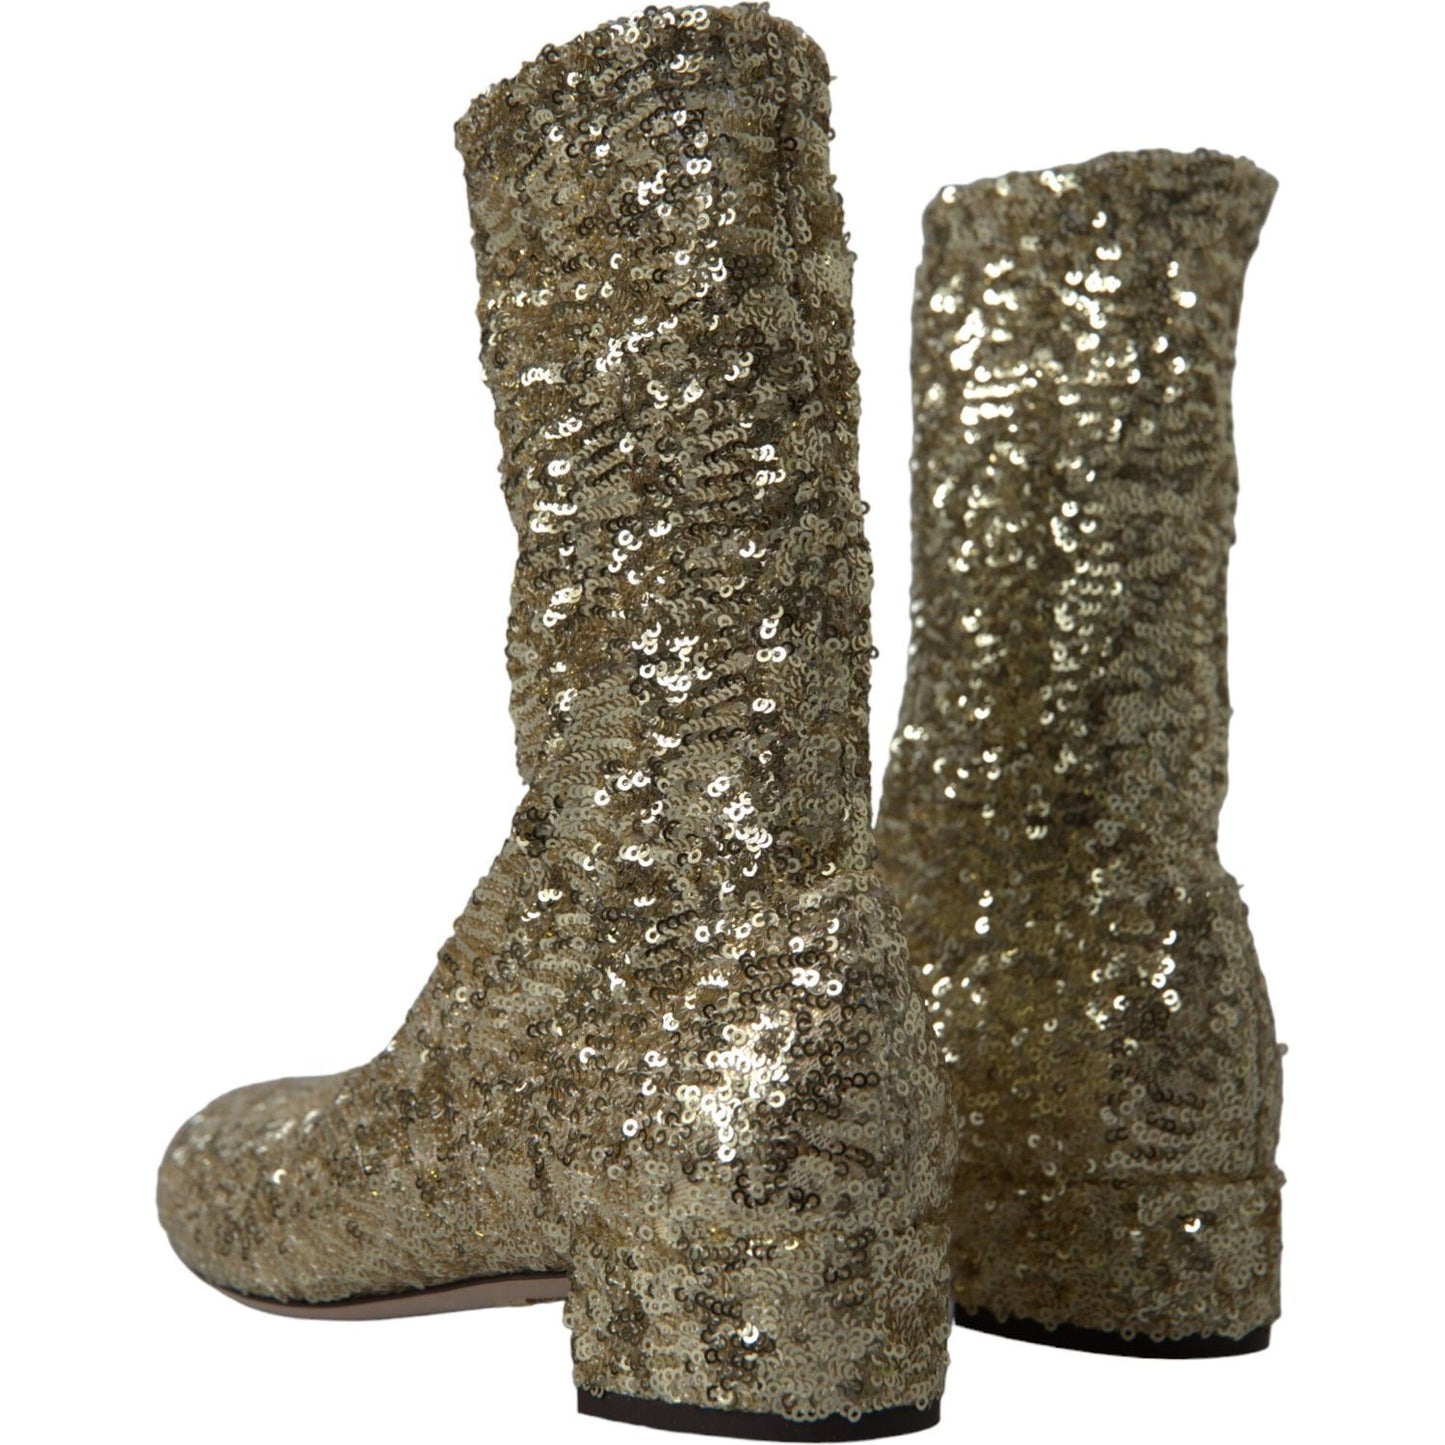 Dolce & Gabbana Elegant Mid Calf Gold Boots Exclusive Design gold-sequined-short-boots-stretch-shoes 465A9707-bg-scaled-c94fb04e-50f.jpg